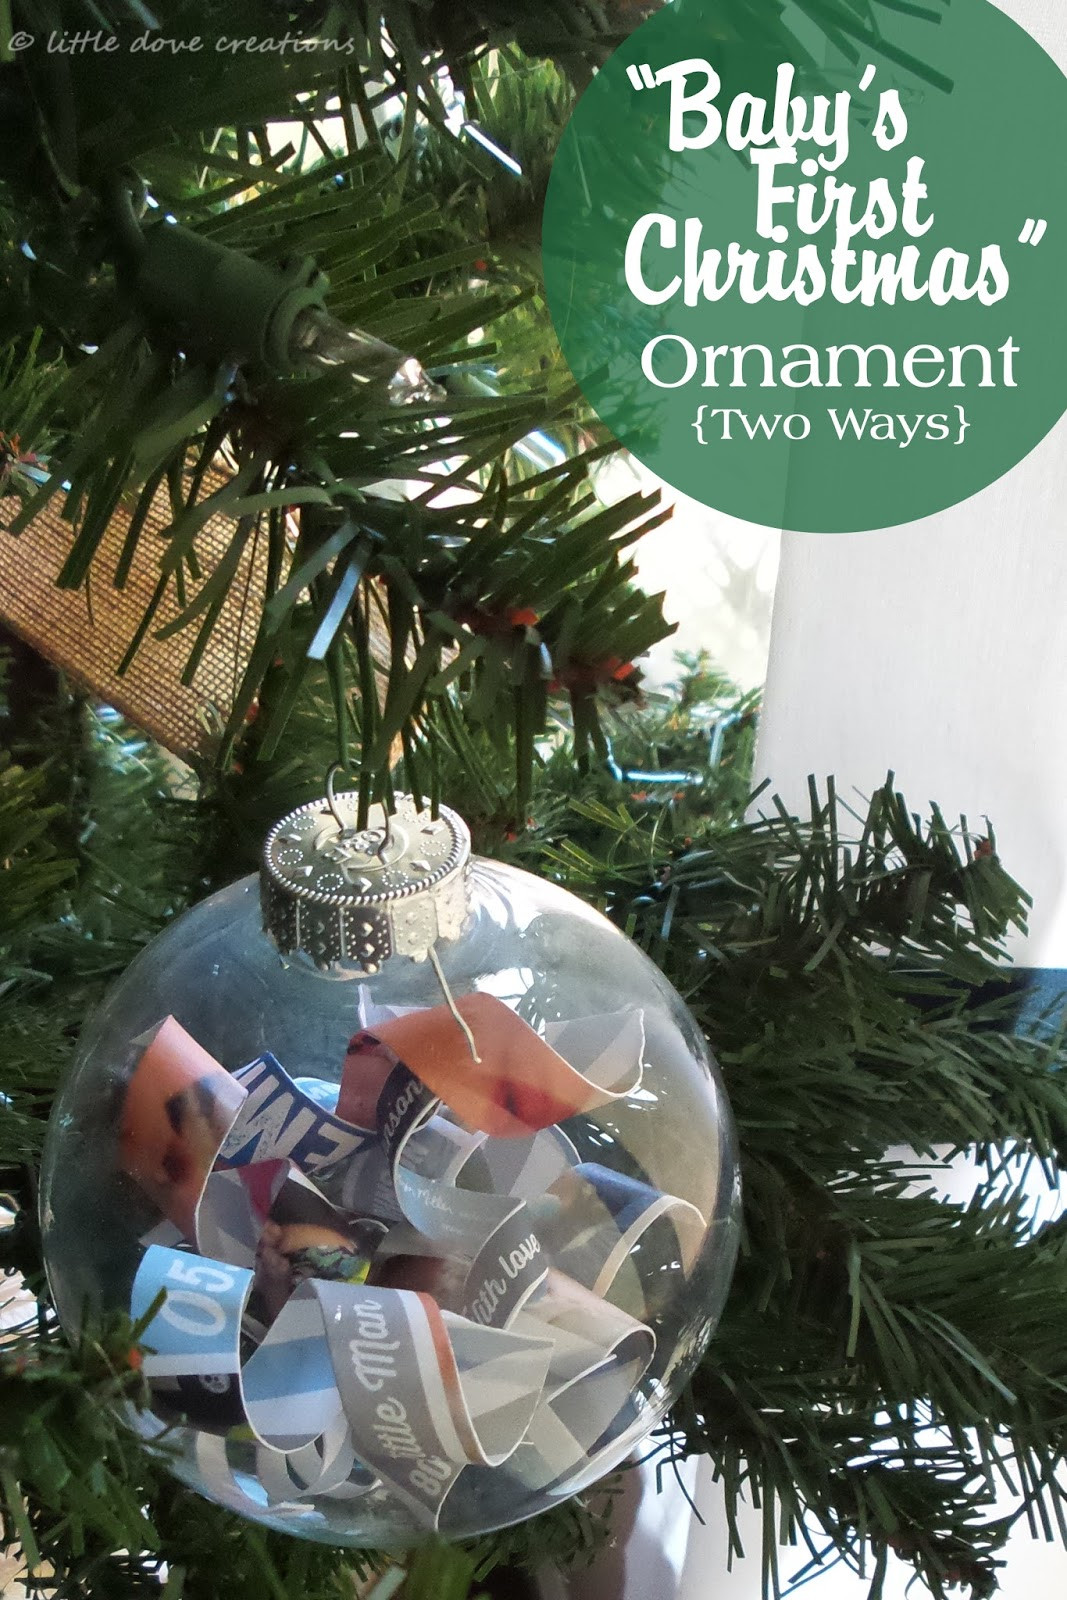 DIY Baby Christmas Ornaments
 diy "baby s first Christmas" ornaments Little Dove Blog